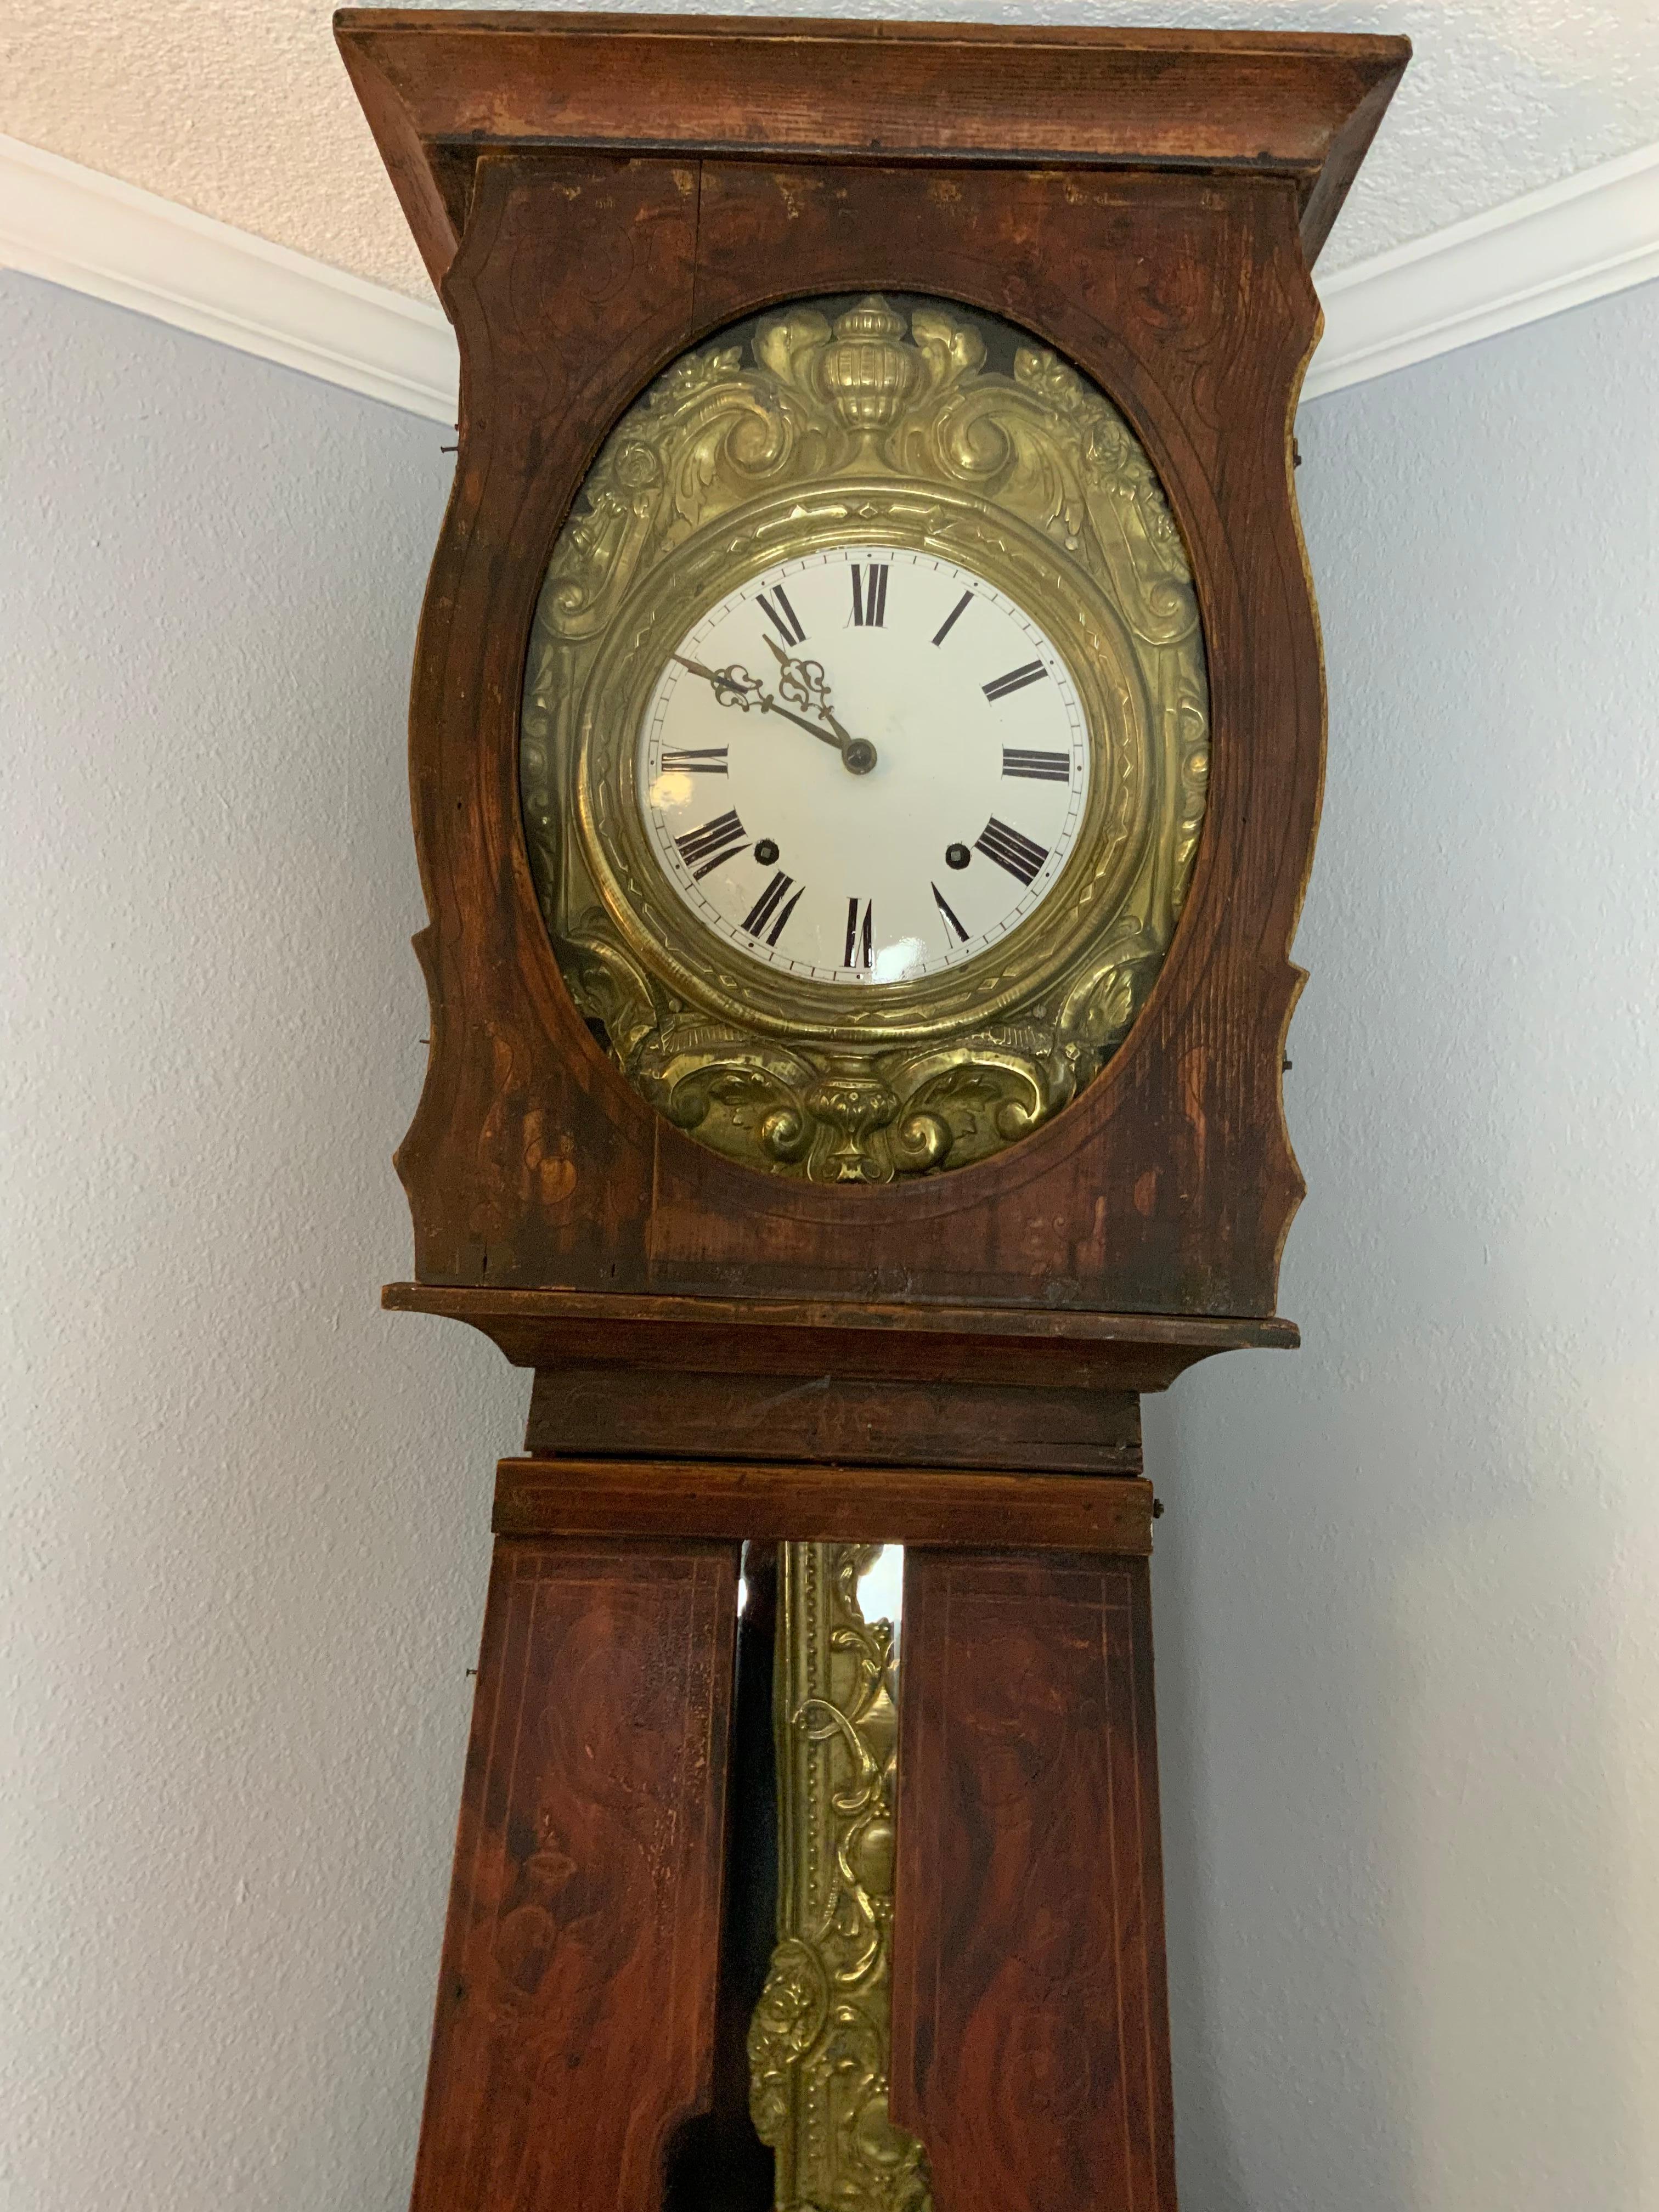 A very nice Comtoise Morbier tall clock in a floral paint decorated Pine case, France - late 19th century. Rings on the hour and two minutes after the hour and a single strike on the half hour.  Movement is keeping excellent time and running very